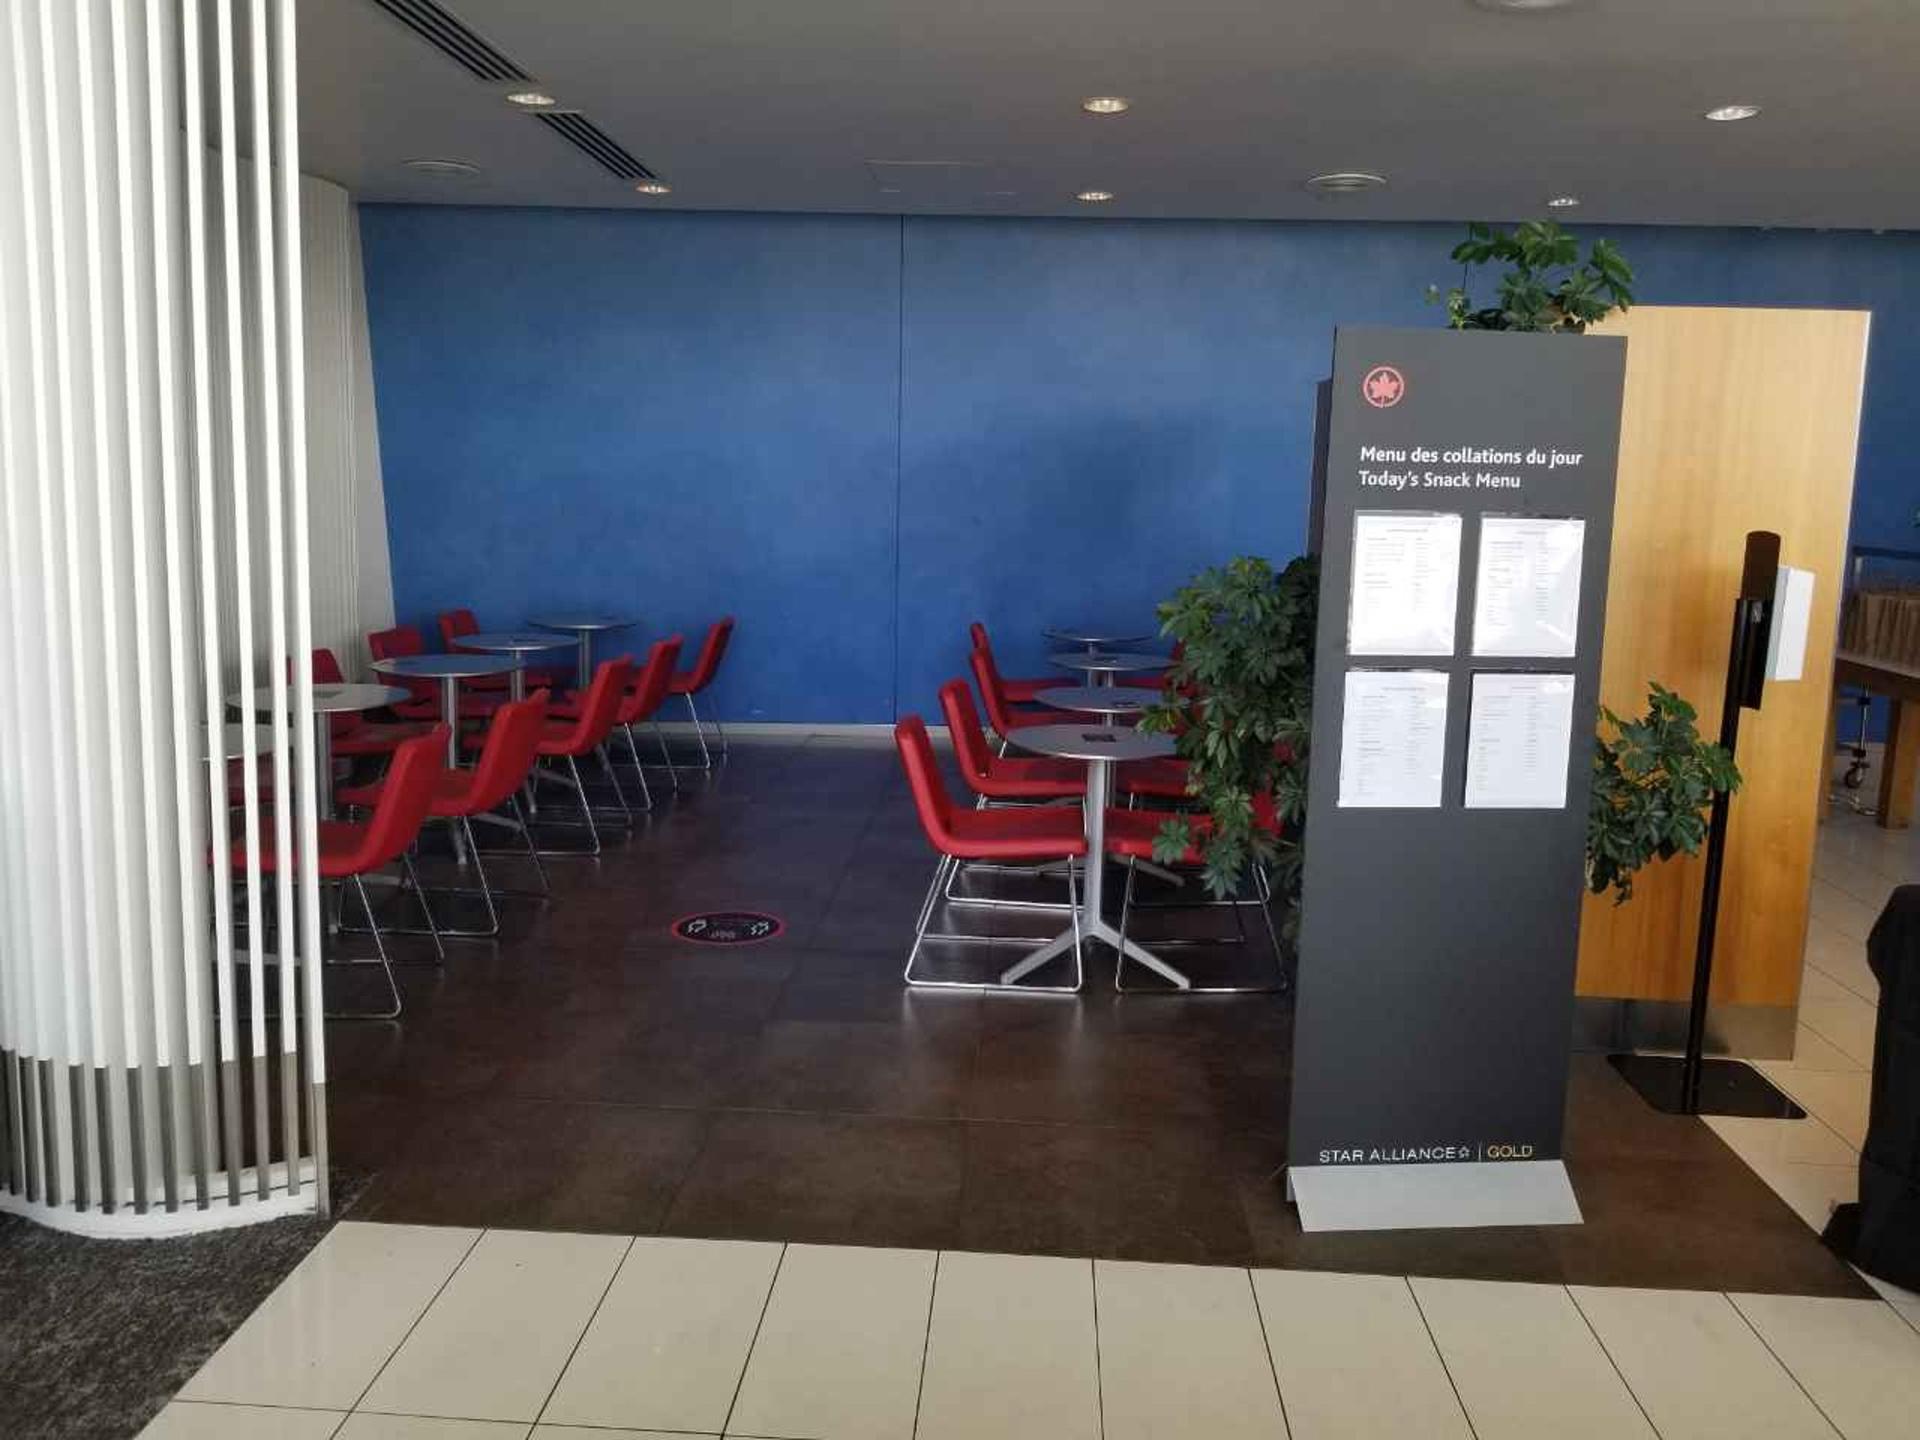 Air Canada Maple Leaf Lounge image 11 of 12